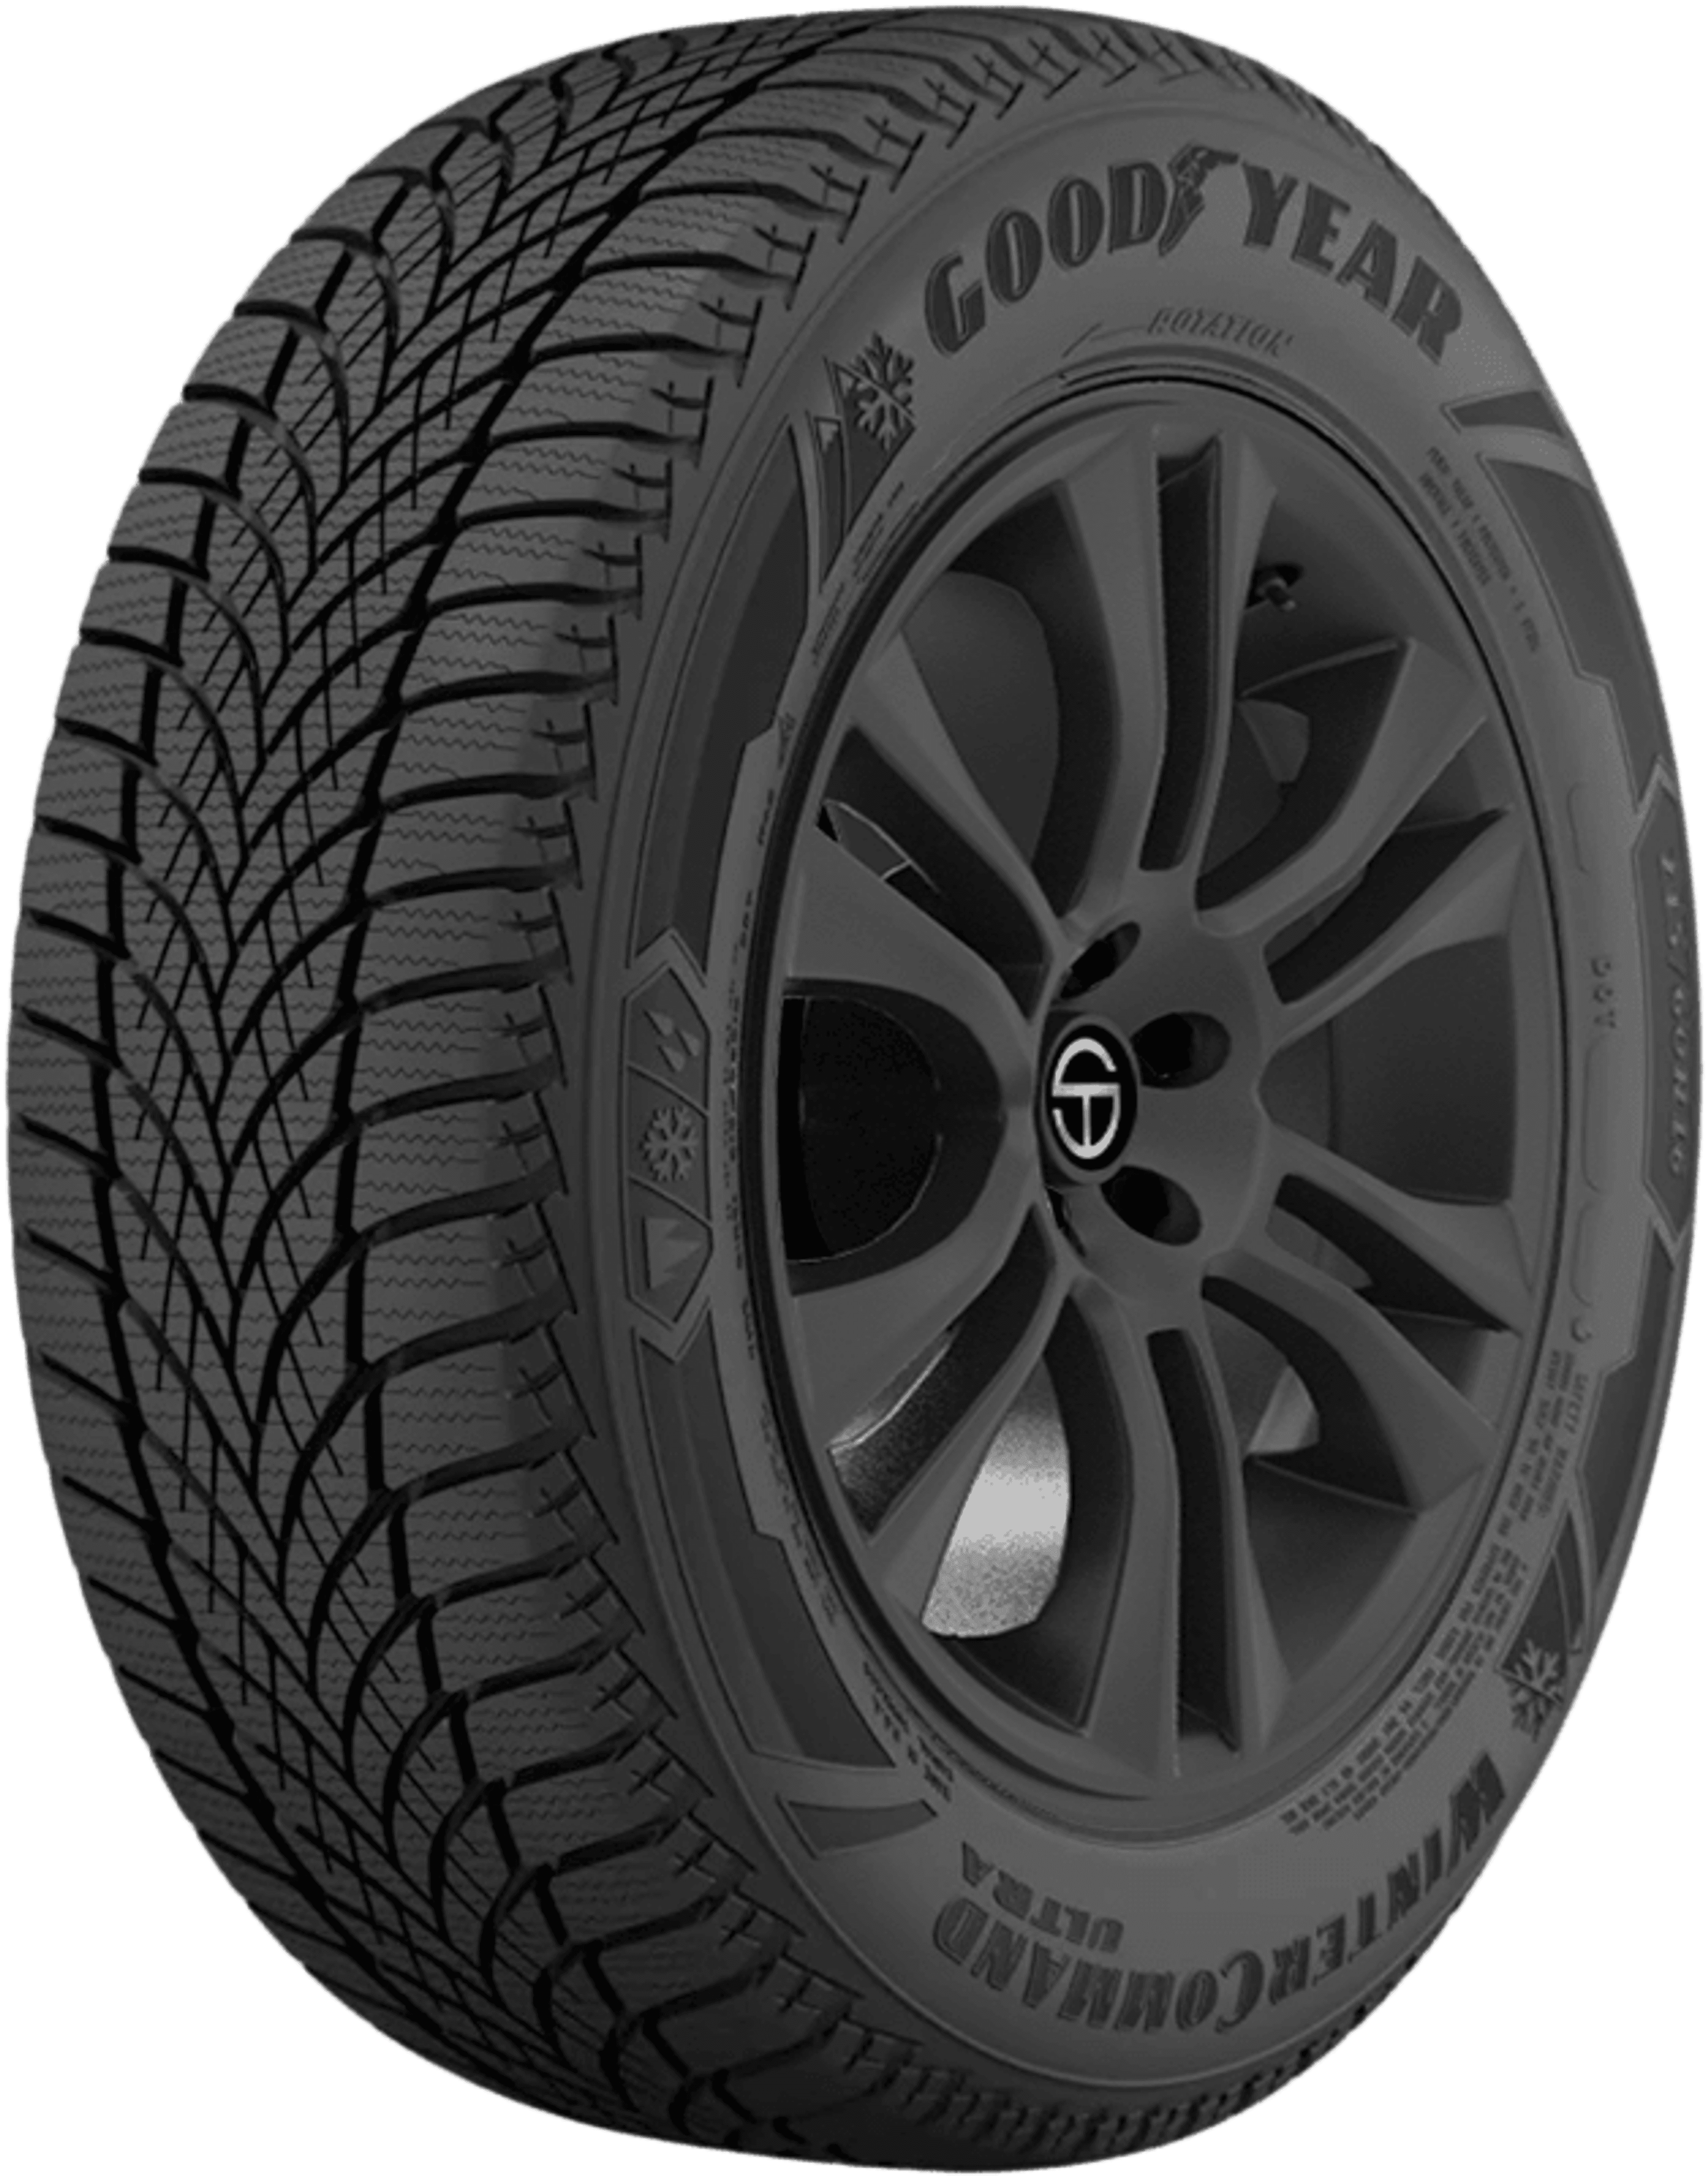 | Online Ultra Command Buy SimpleTire Tires Goodyear Winter